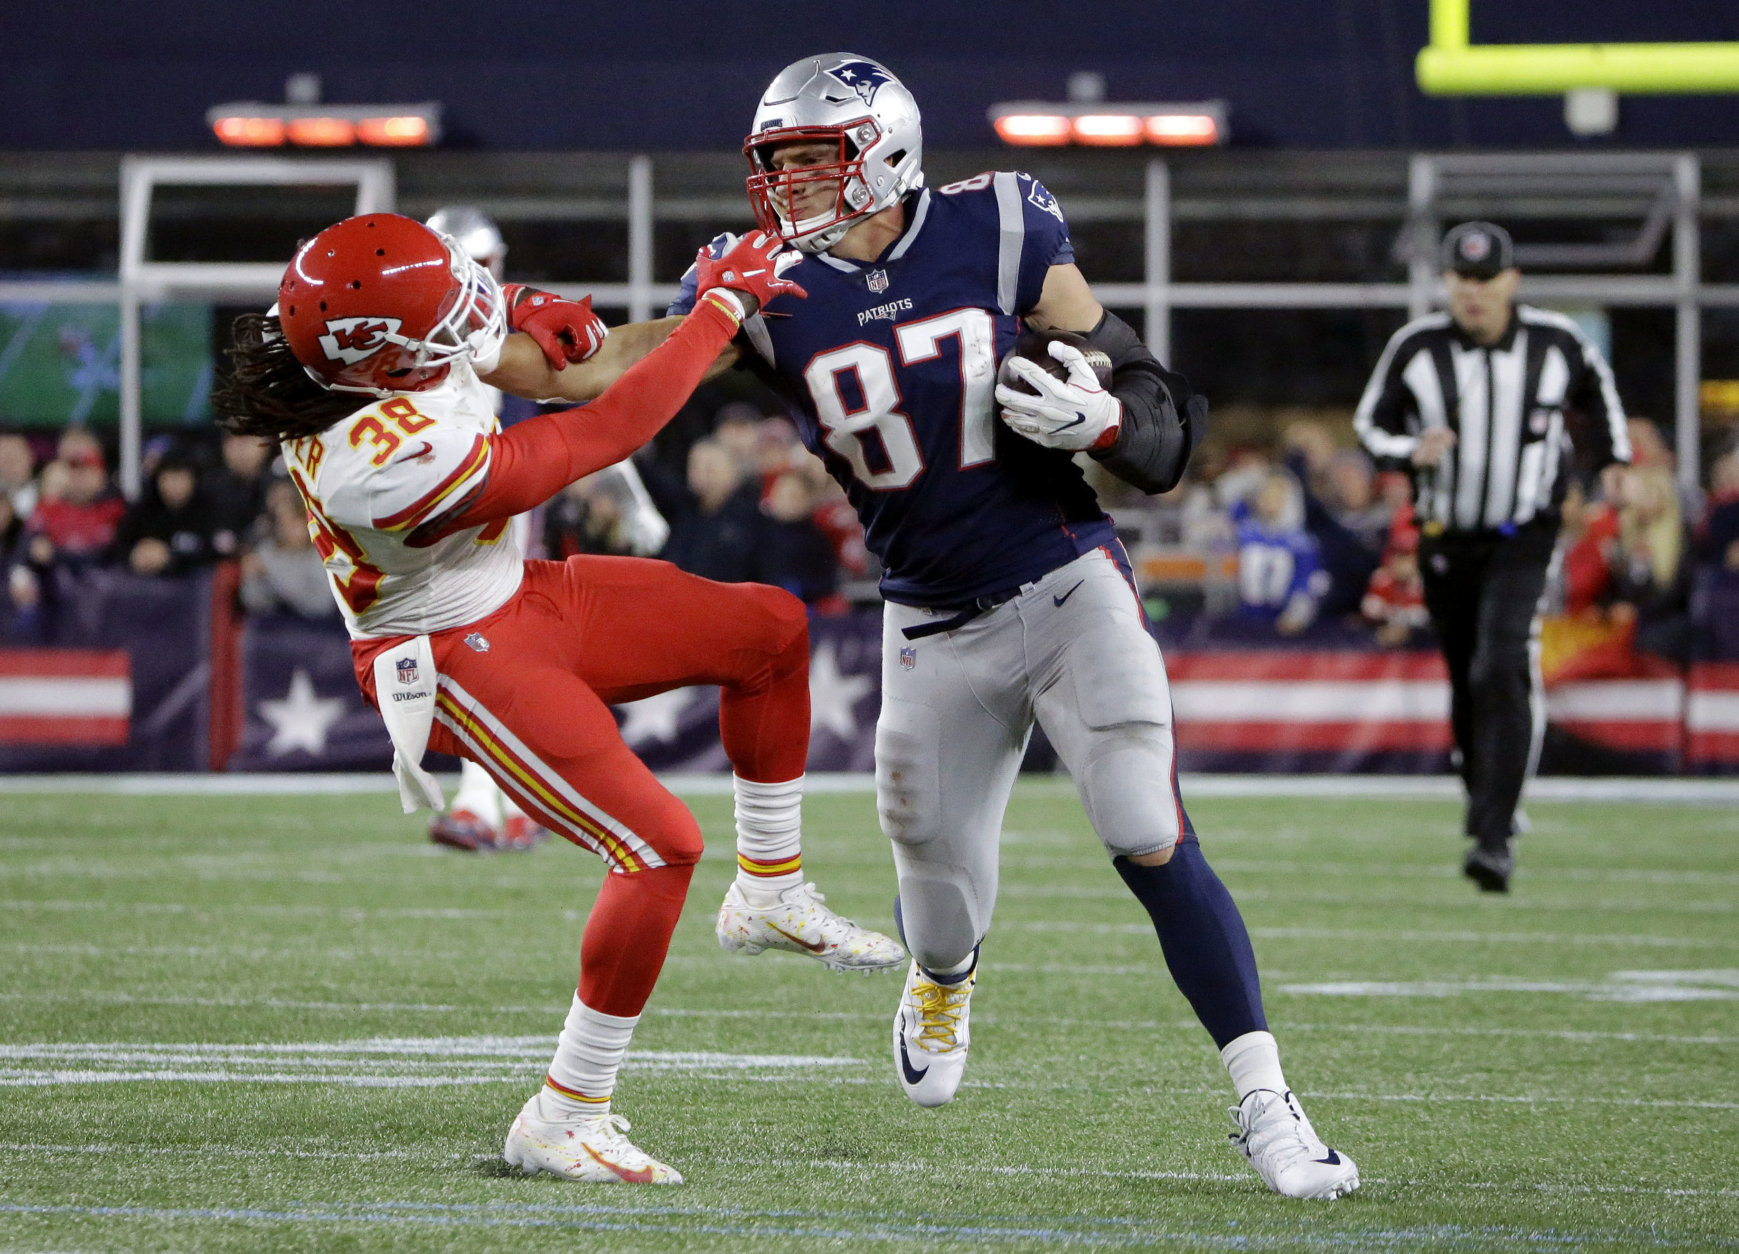 New England Patriots tight end Rob Gronkowski (87) gives a stiff arm to Kansas City Chiefs free safety Ron Parker (38) after catching a pass during the second half of an NFL football game, Sunday, Oct. 14, 2018, in Foxborough, Mass. (AP Photo/Steven Senne)